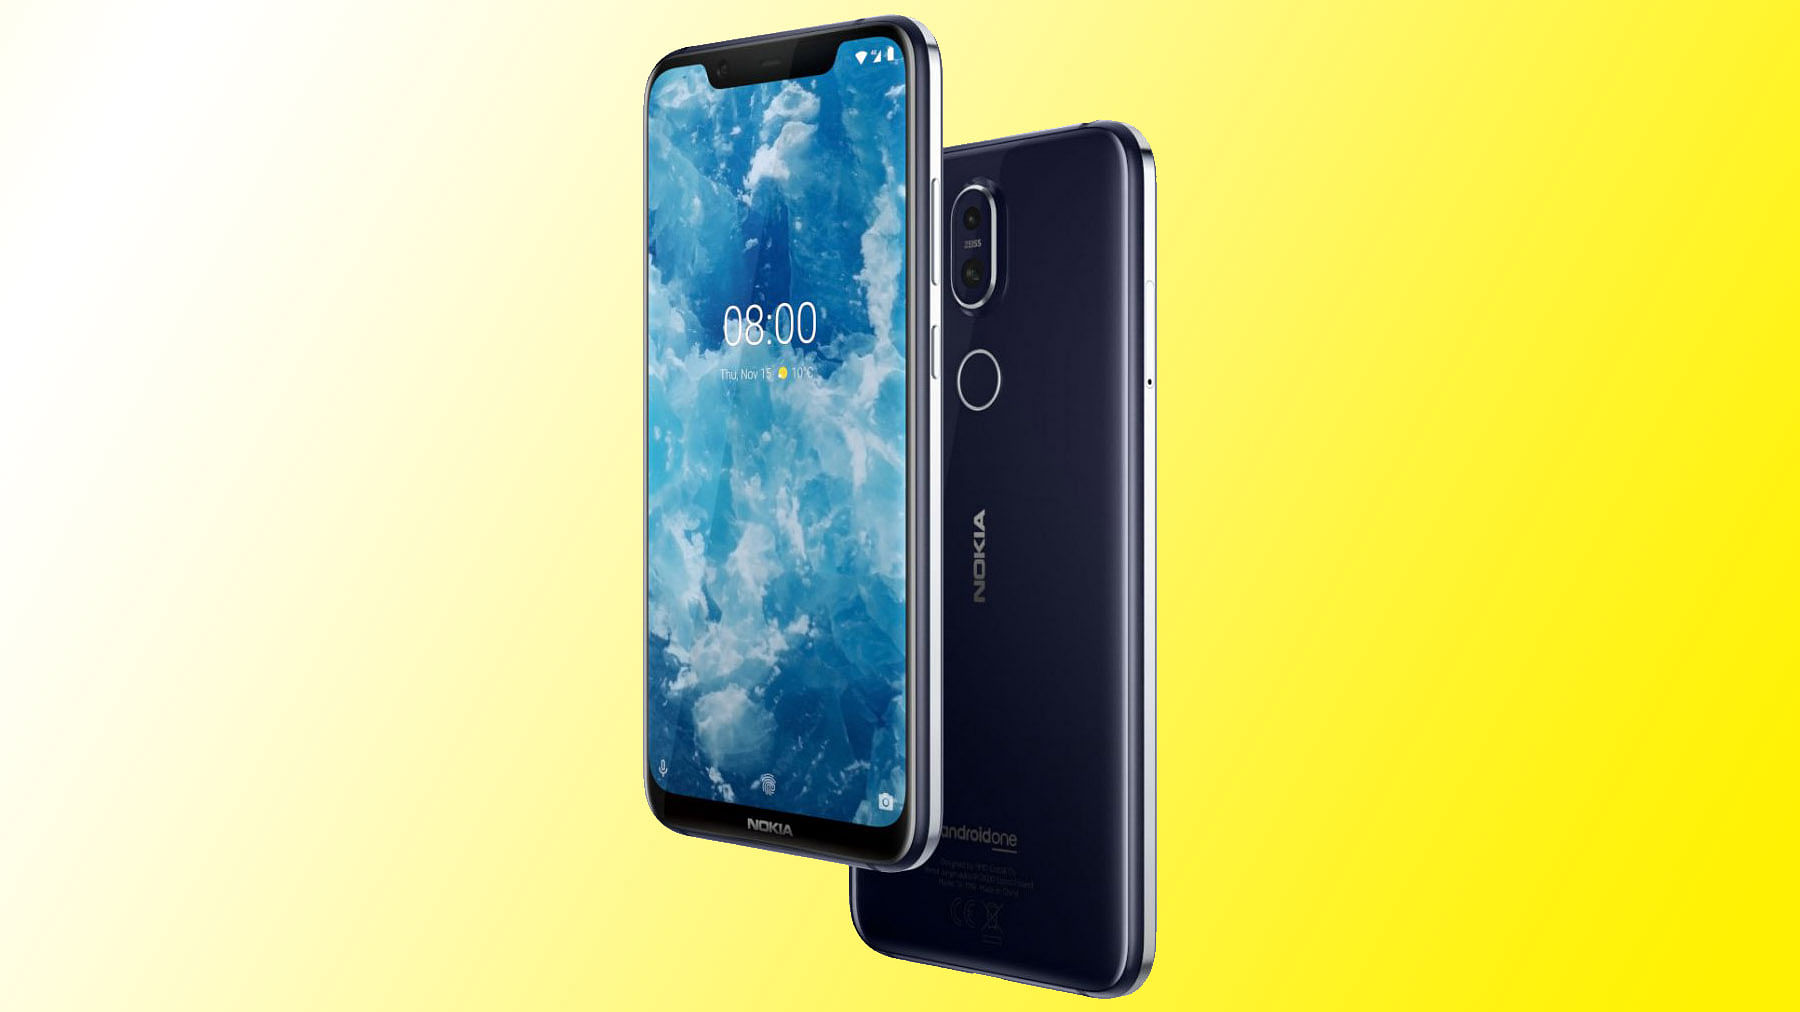 Nokia 8.1 with Android 9.0 Pie has been launched globally.&nbsp;